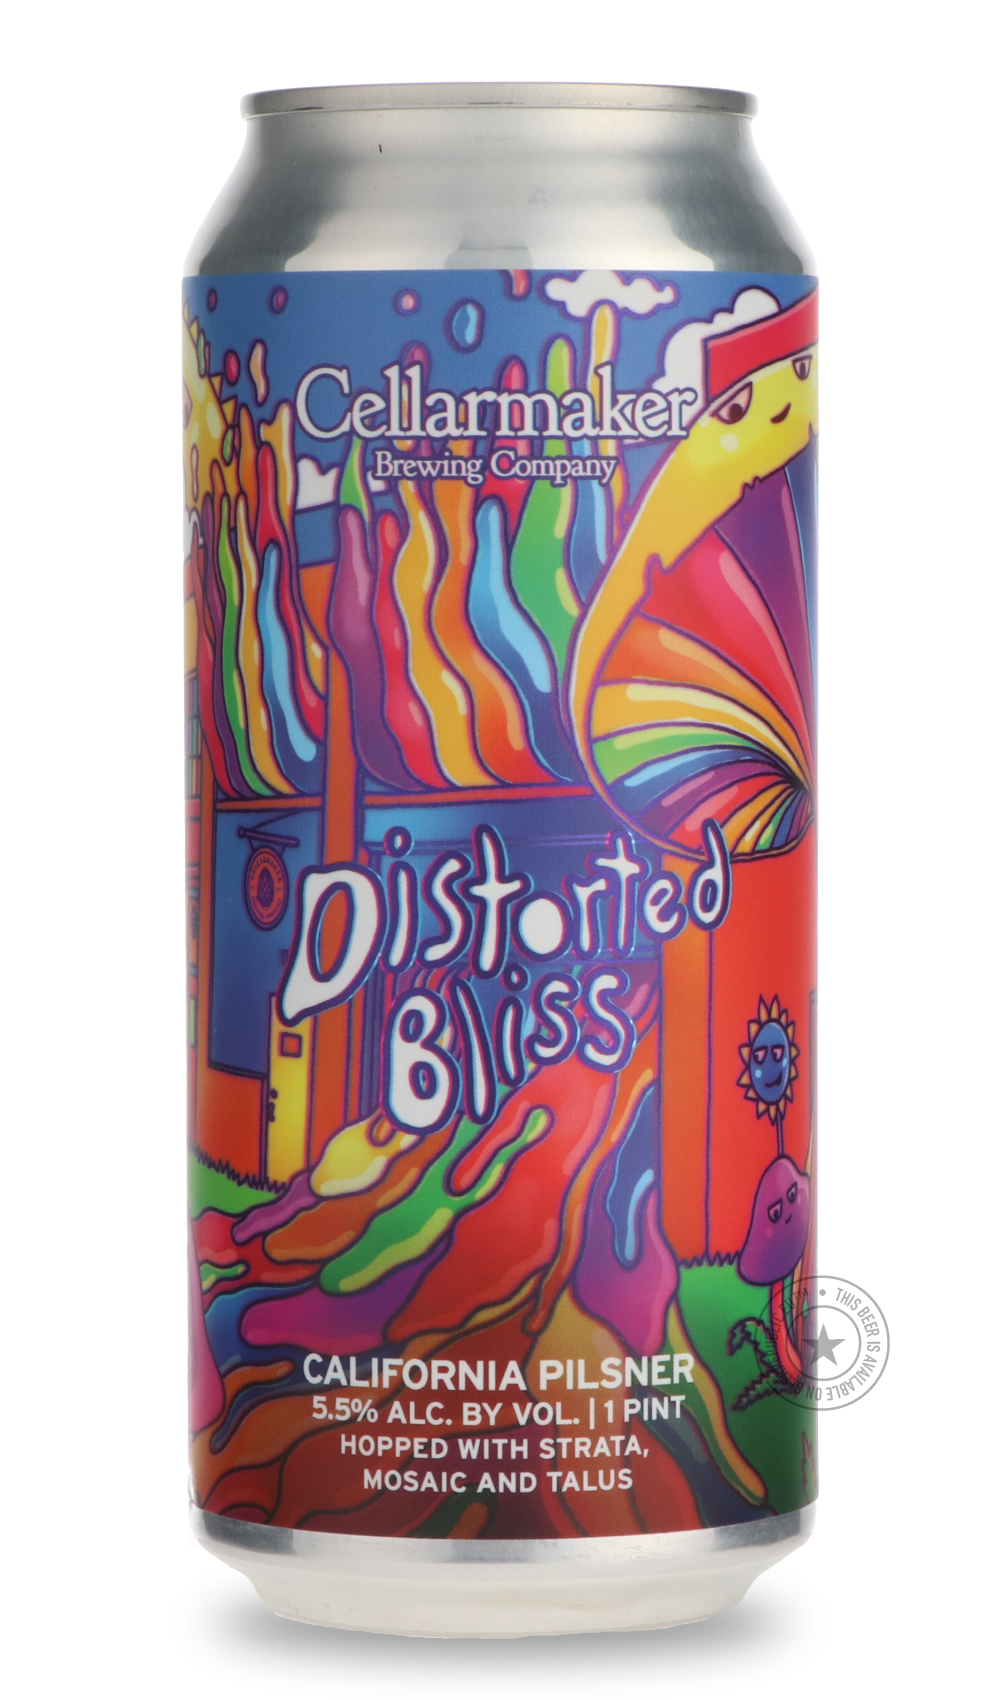 -Cellarmaker- Distorted Bliss-Pale / Blonde- Only @ Beer Republic - The best online beer store for American & Canadian craft beer - Buy beer online from the USA and Canada - Bier online kopen - Amerikaans bier kopen - Craft beer store - Craft beer kopen - Amerikanisch bier kaufen - Bier online kaufen - Acheter biere online - IPA - Stout - Porter - New England IPA - Hazy IPA - Imperial Stout - Barrel Aged - Barrel Aged Imperial Stout - Brown - Dark beer - Blond - Blonde - Pilsner - Lager - Wheat - Weizen - A